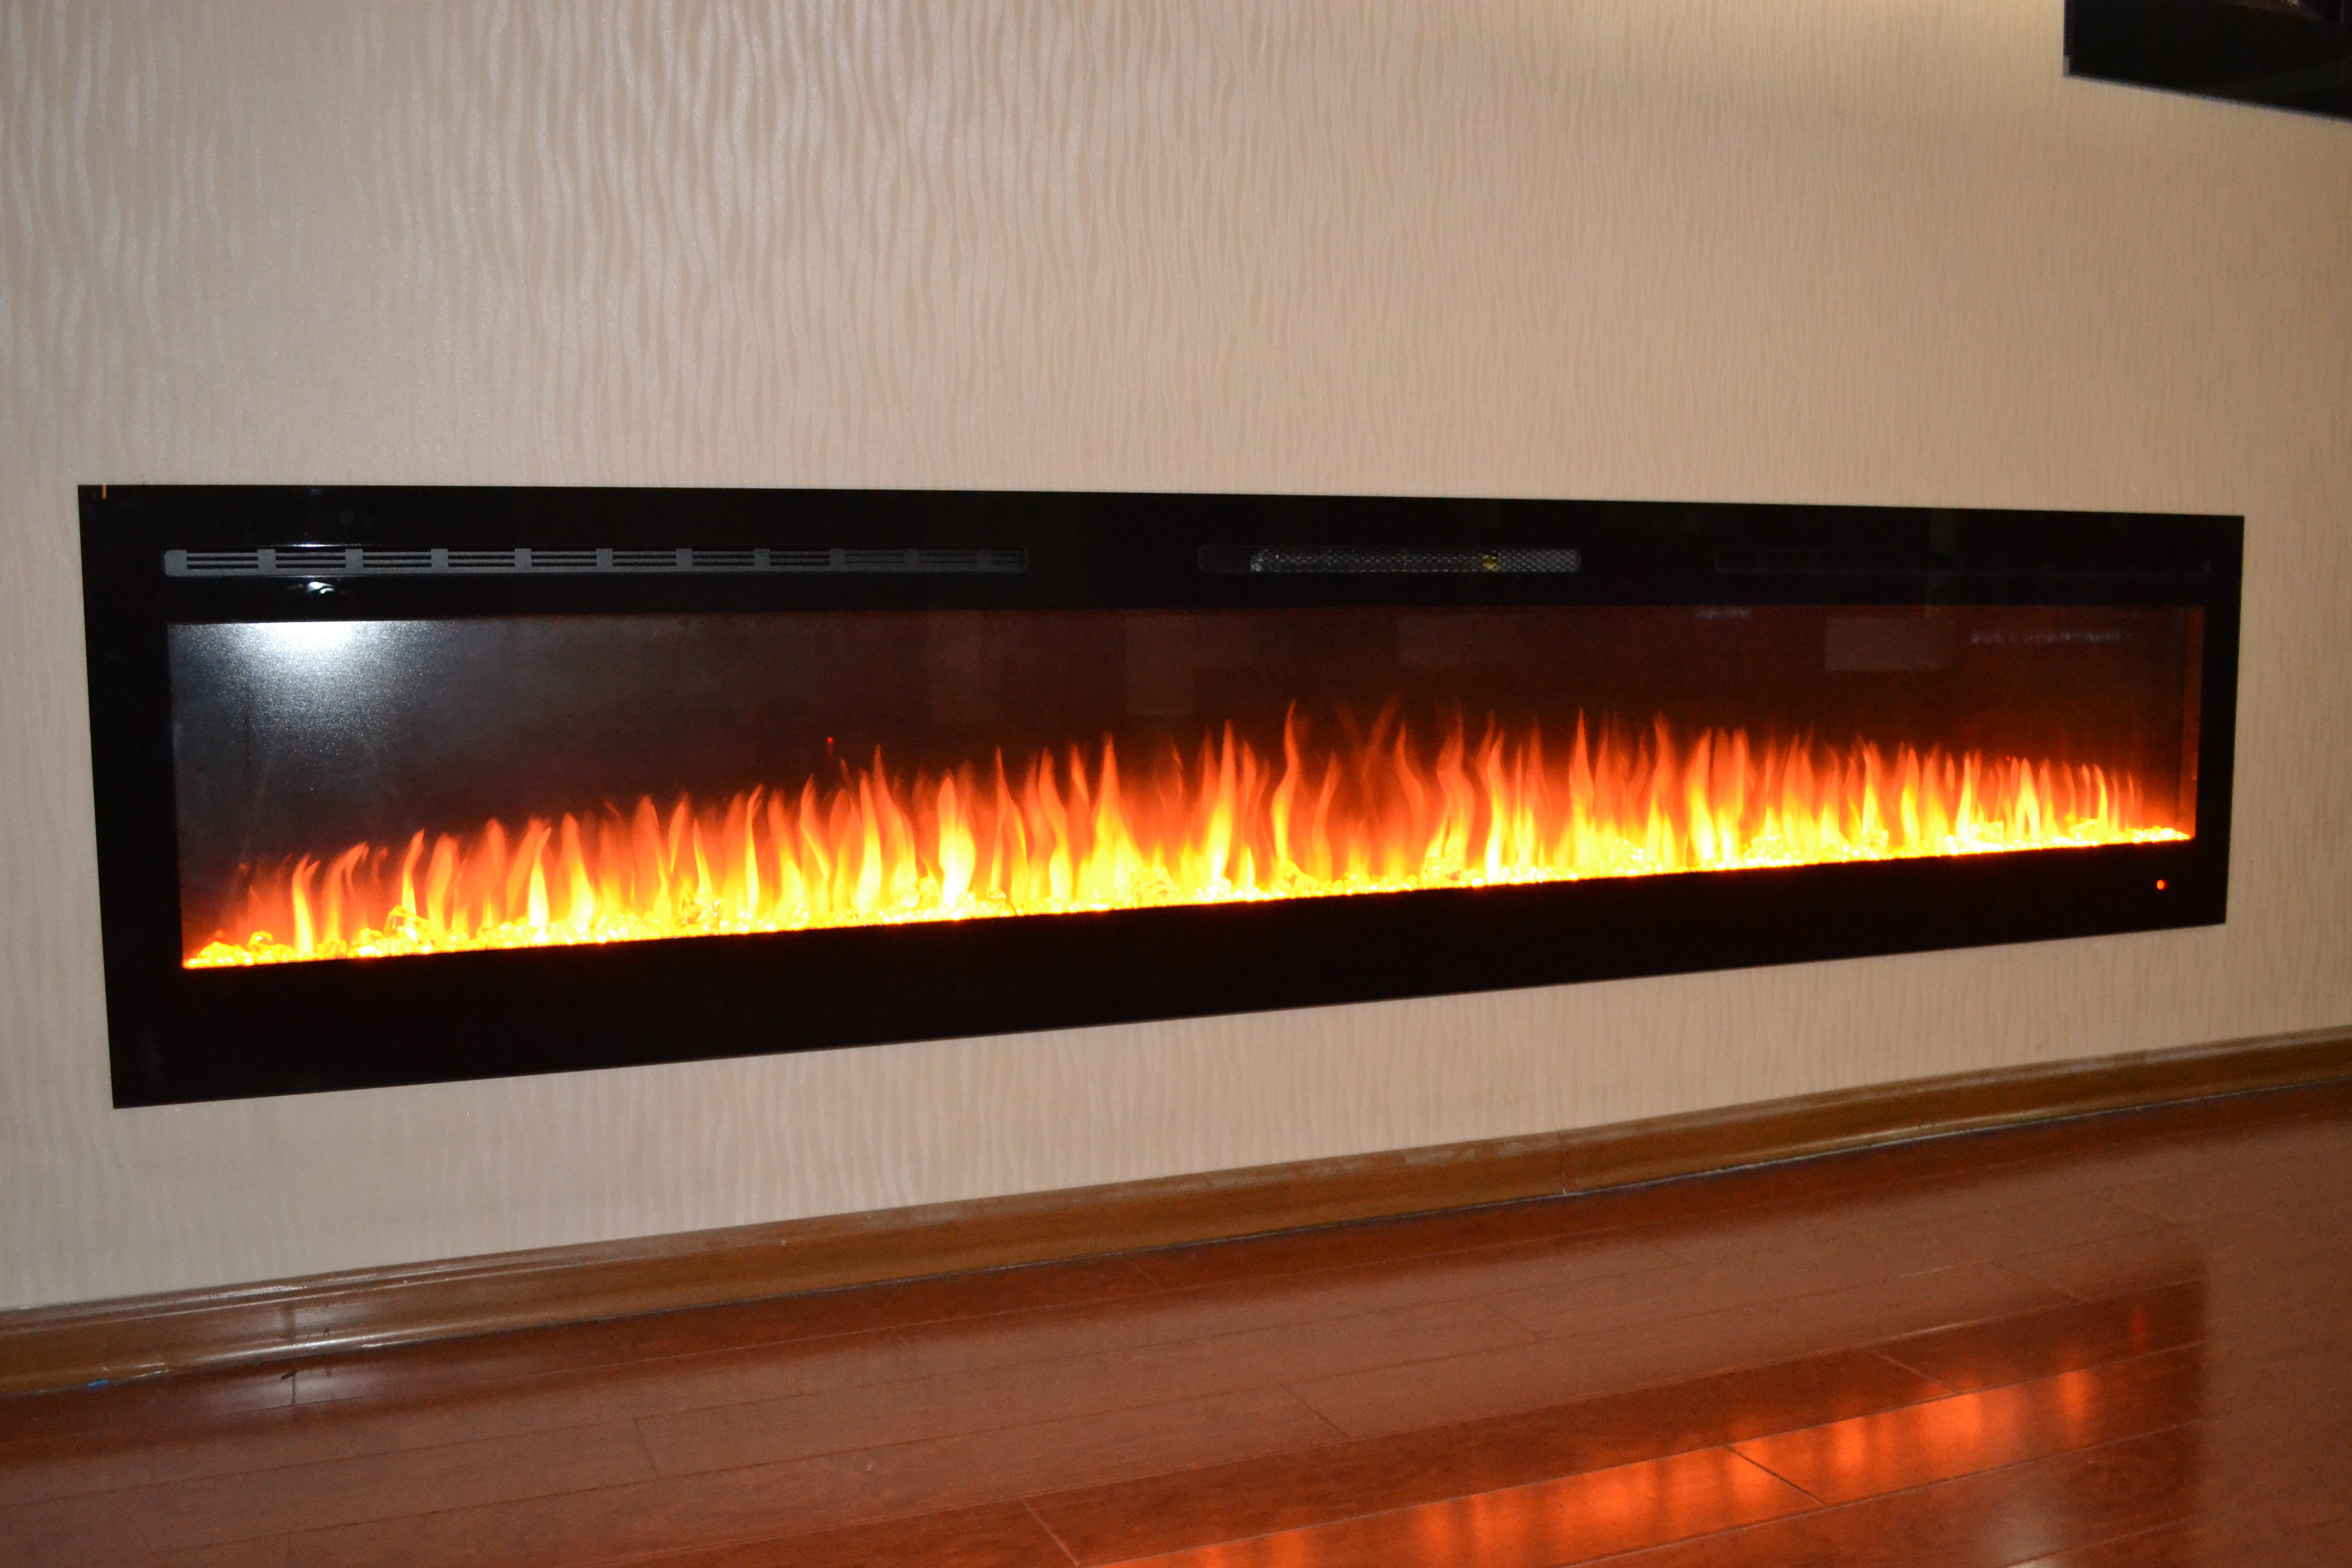 72 inch truflame inset large black wall mounted electric fire